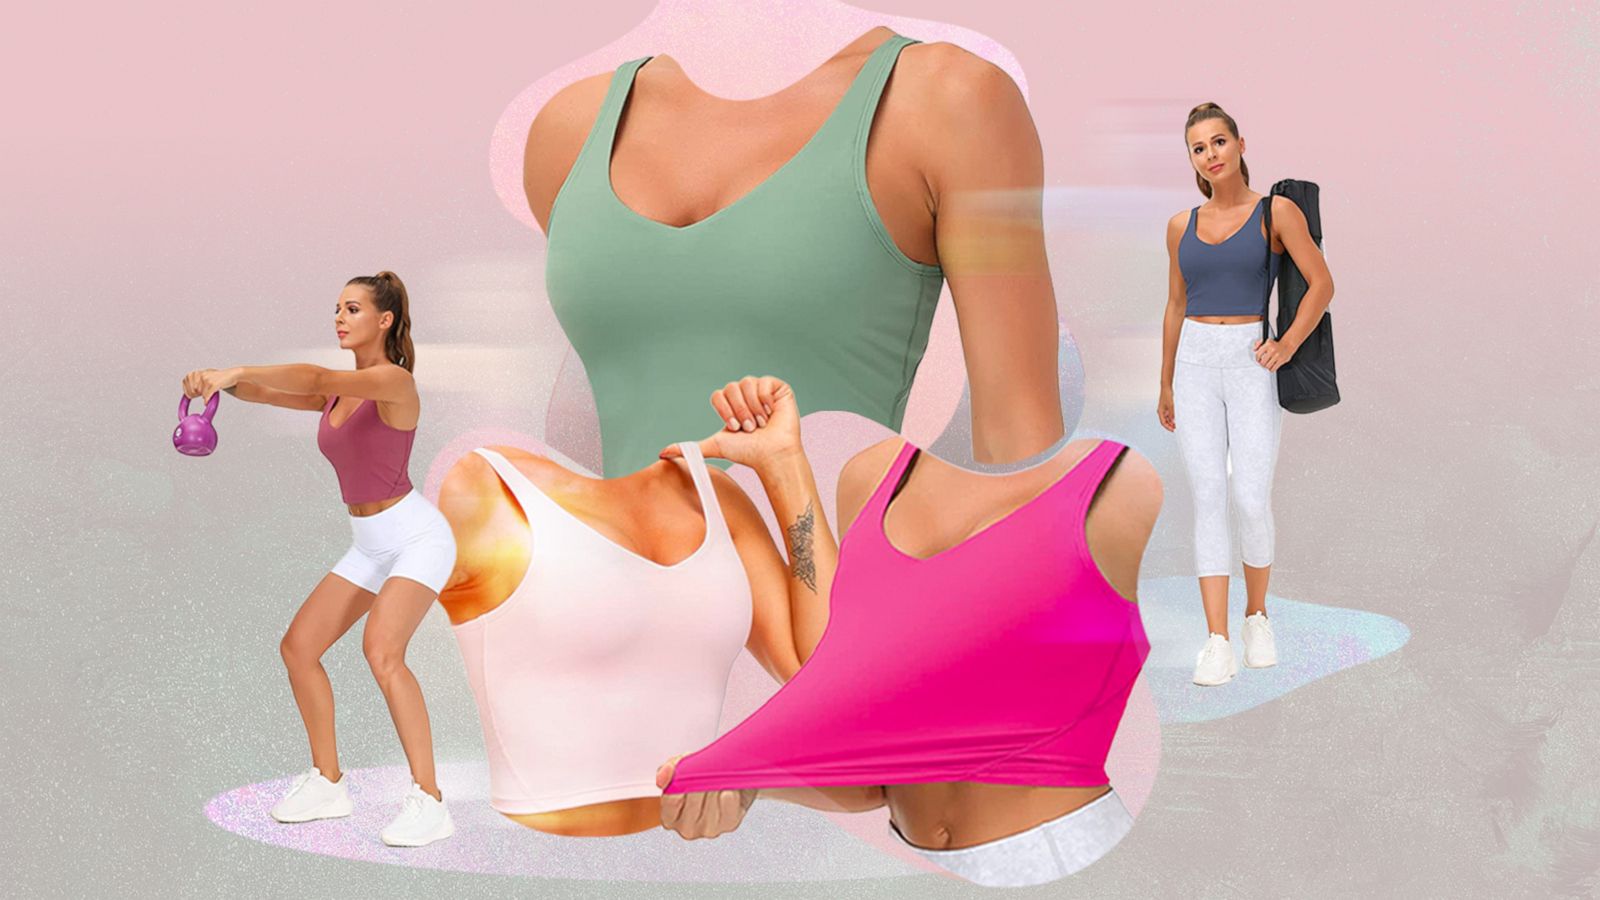 What The Name Of The Bra Crop Top? – solowomen